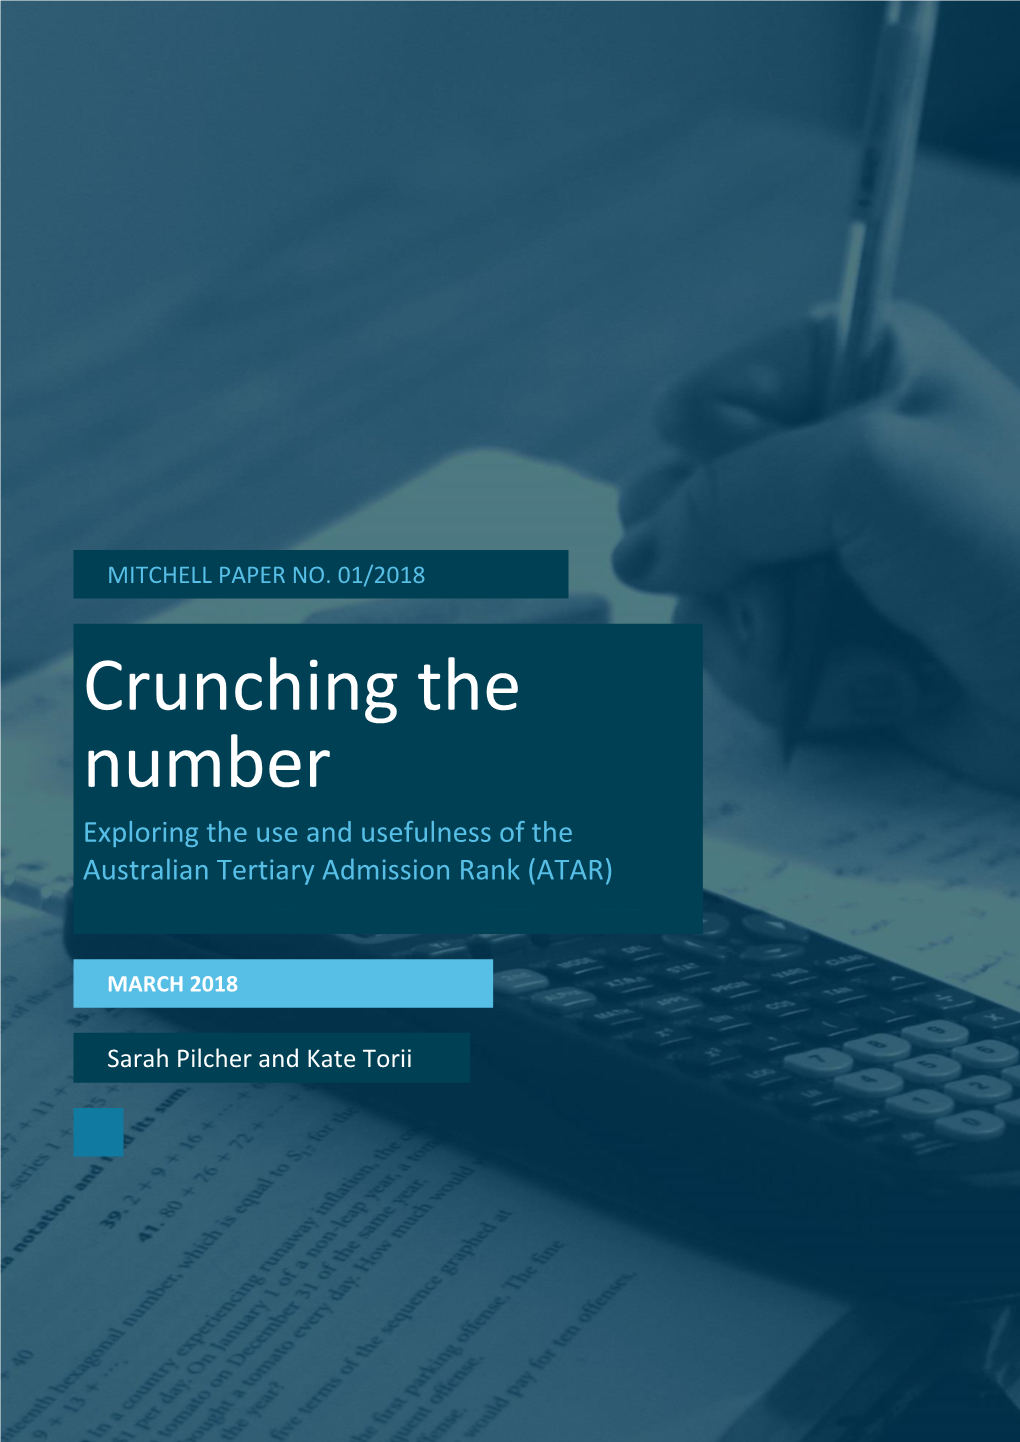 Crunching the Number: Exploring the Use and Usefulness of the Australian Tertiary Admission Rank (ATAR), Mitchell Institute Paper No